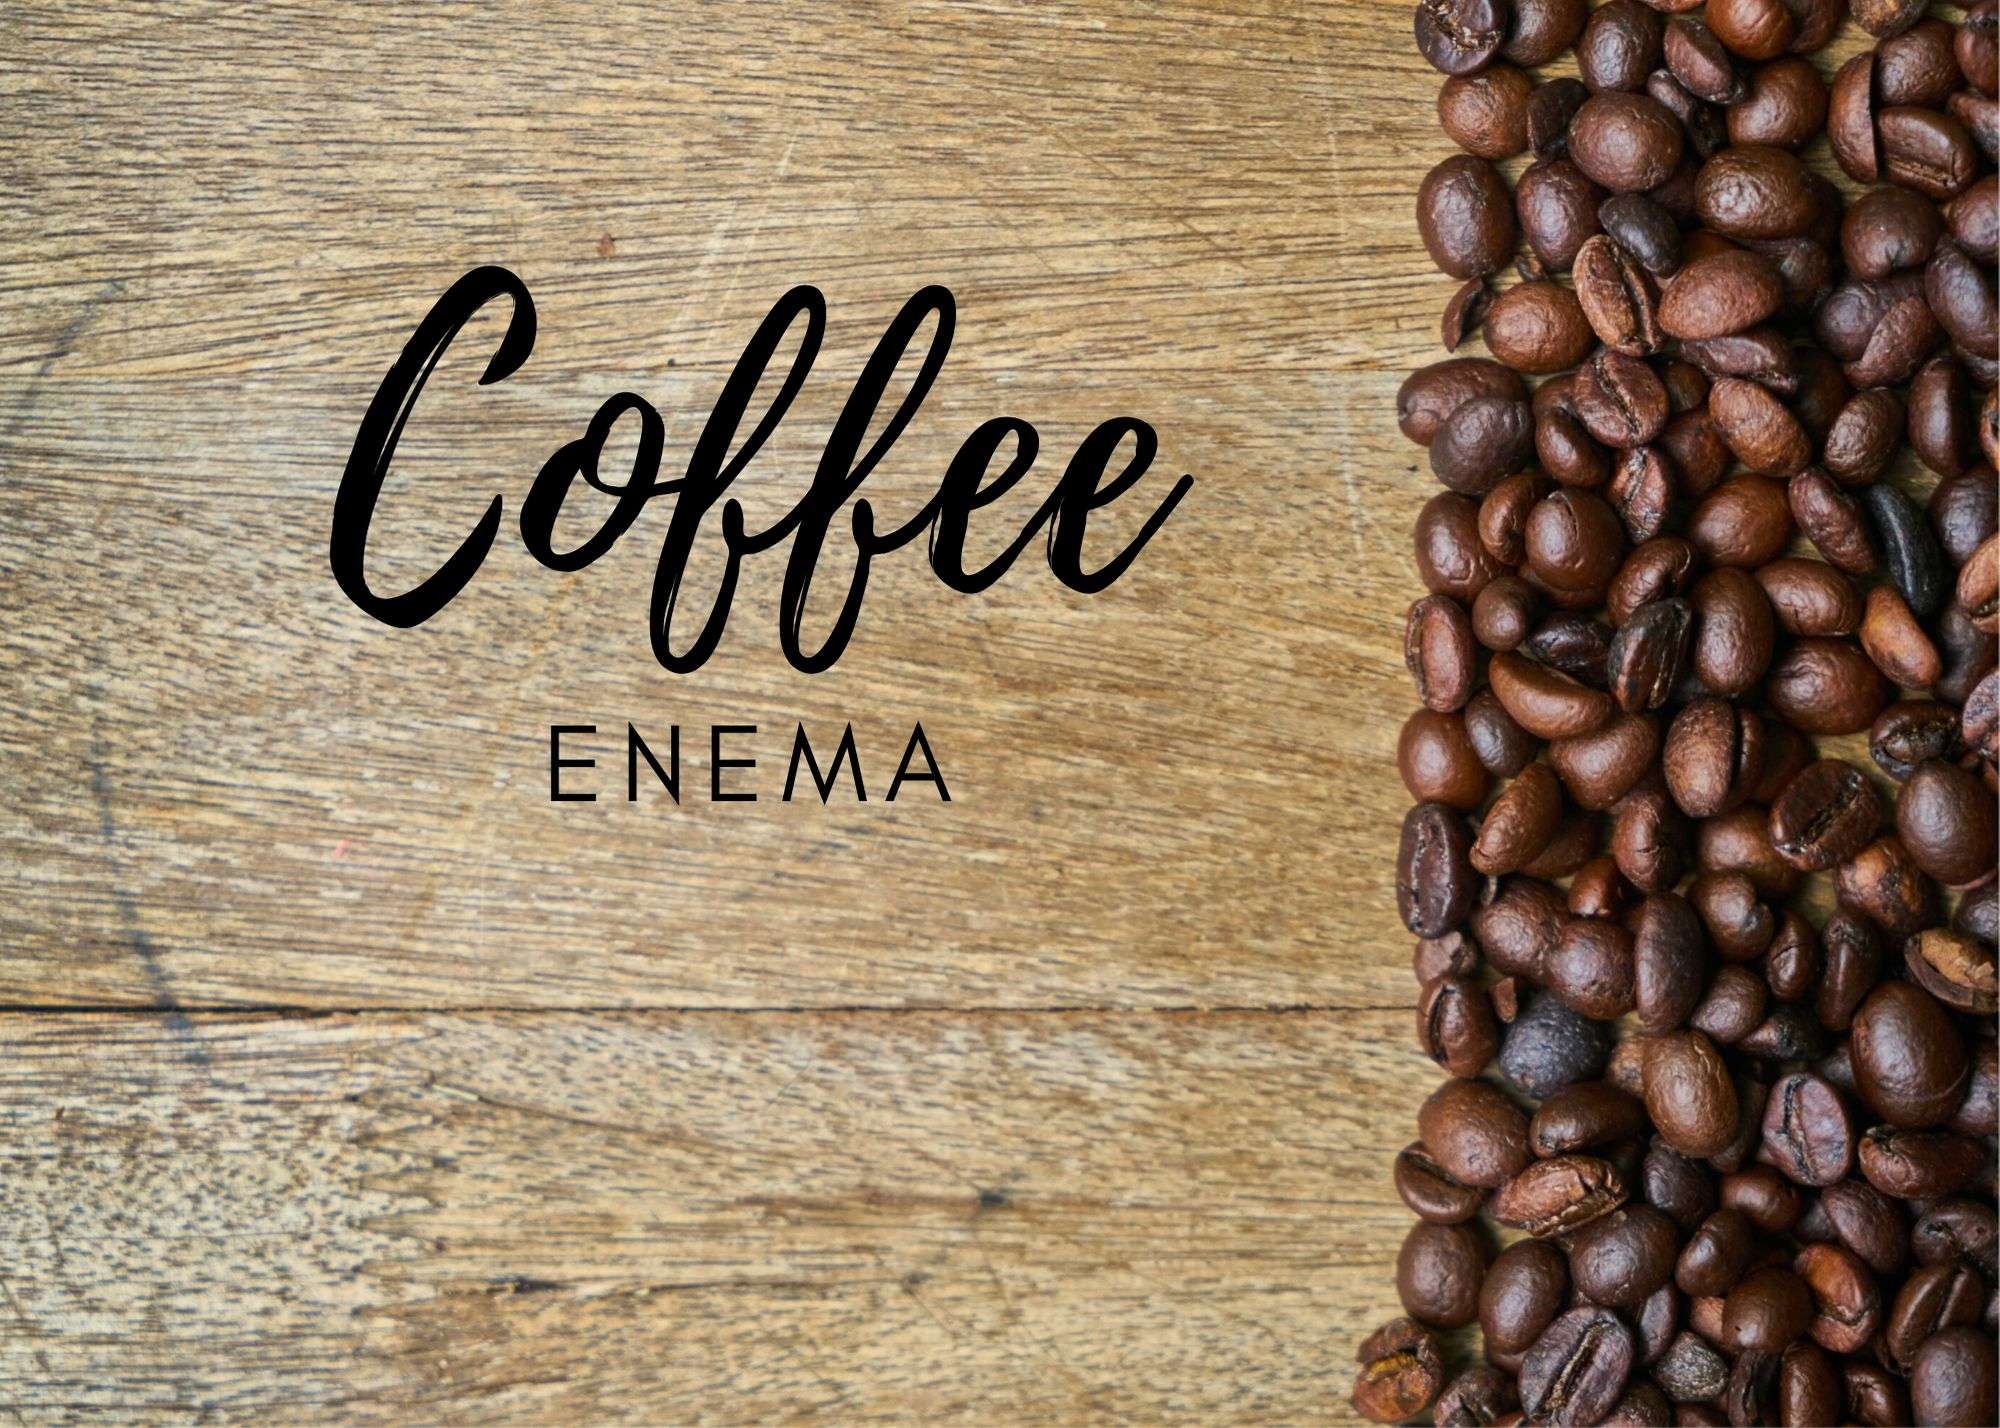 Can Coffee Be Used to Do Enemas?